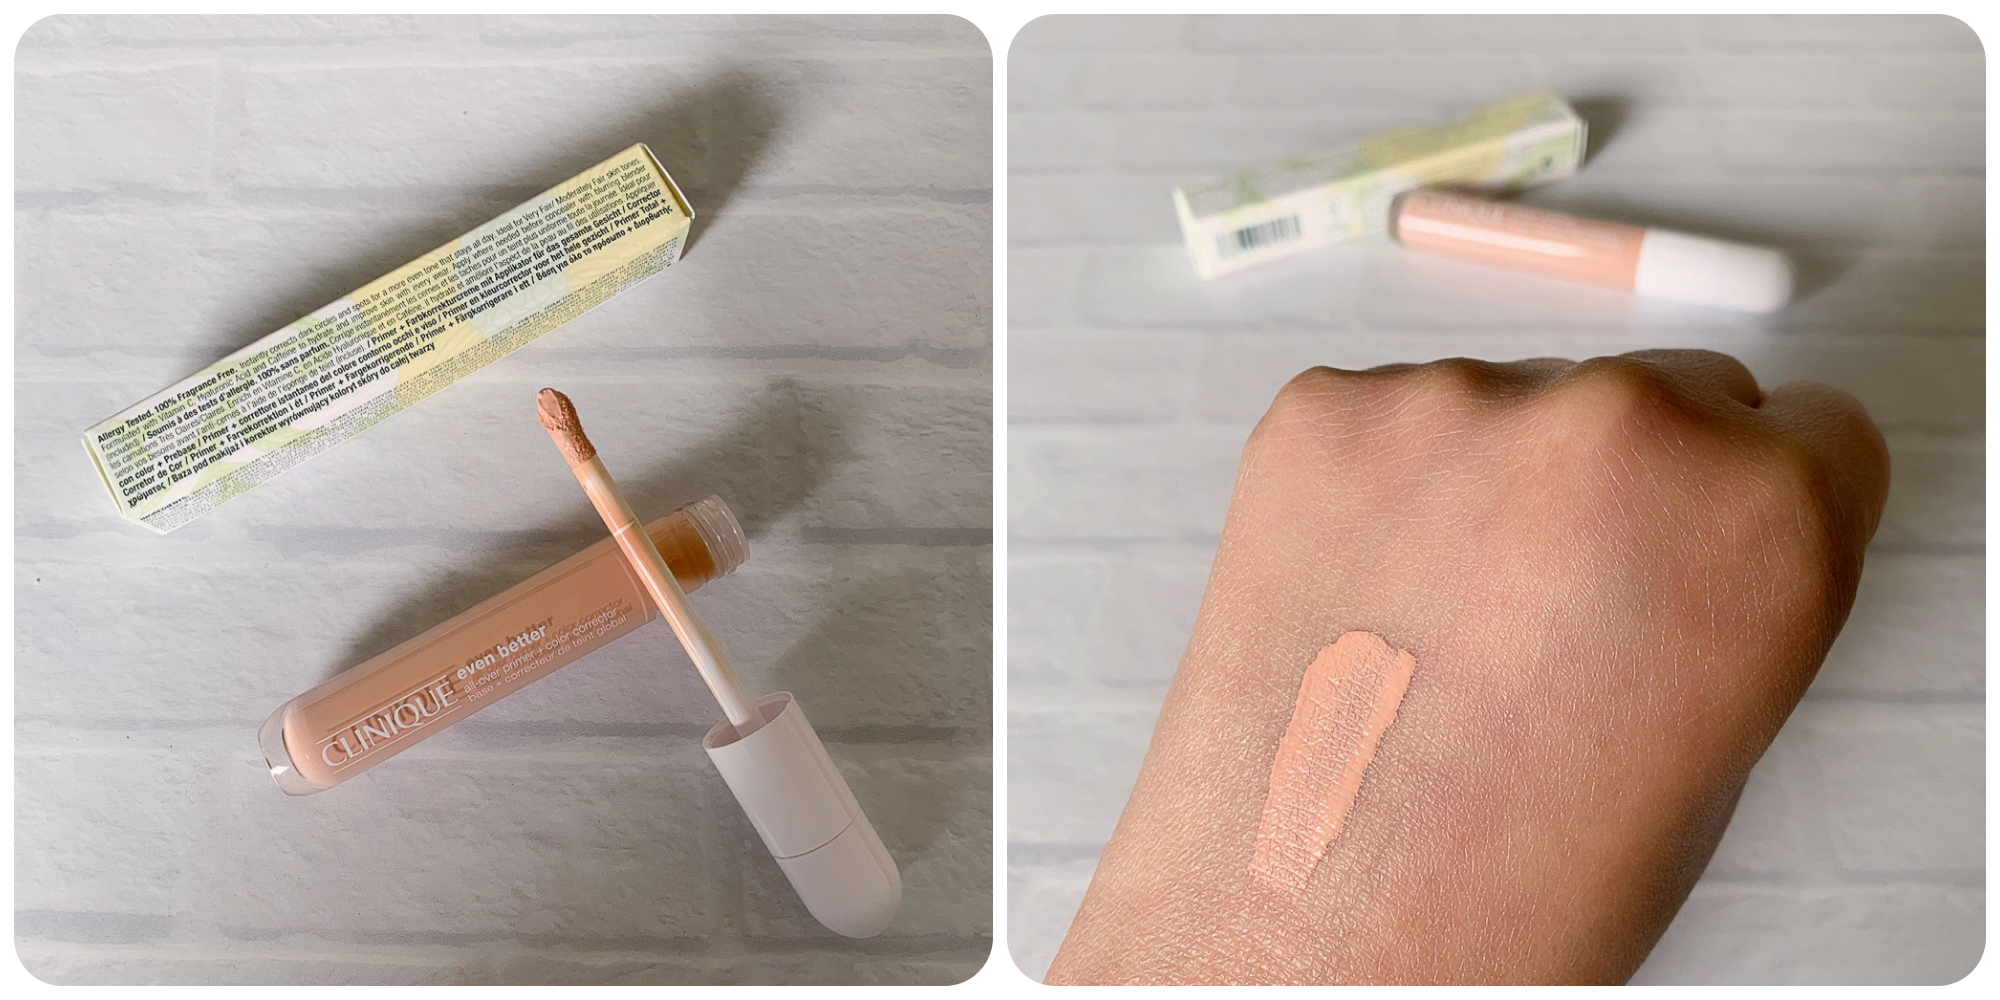 Clinique Even Better All-Over Primer + Color Corrector In Peach Review Swatches | A Very Sweet Blog